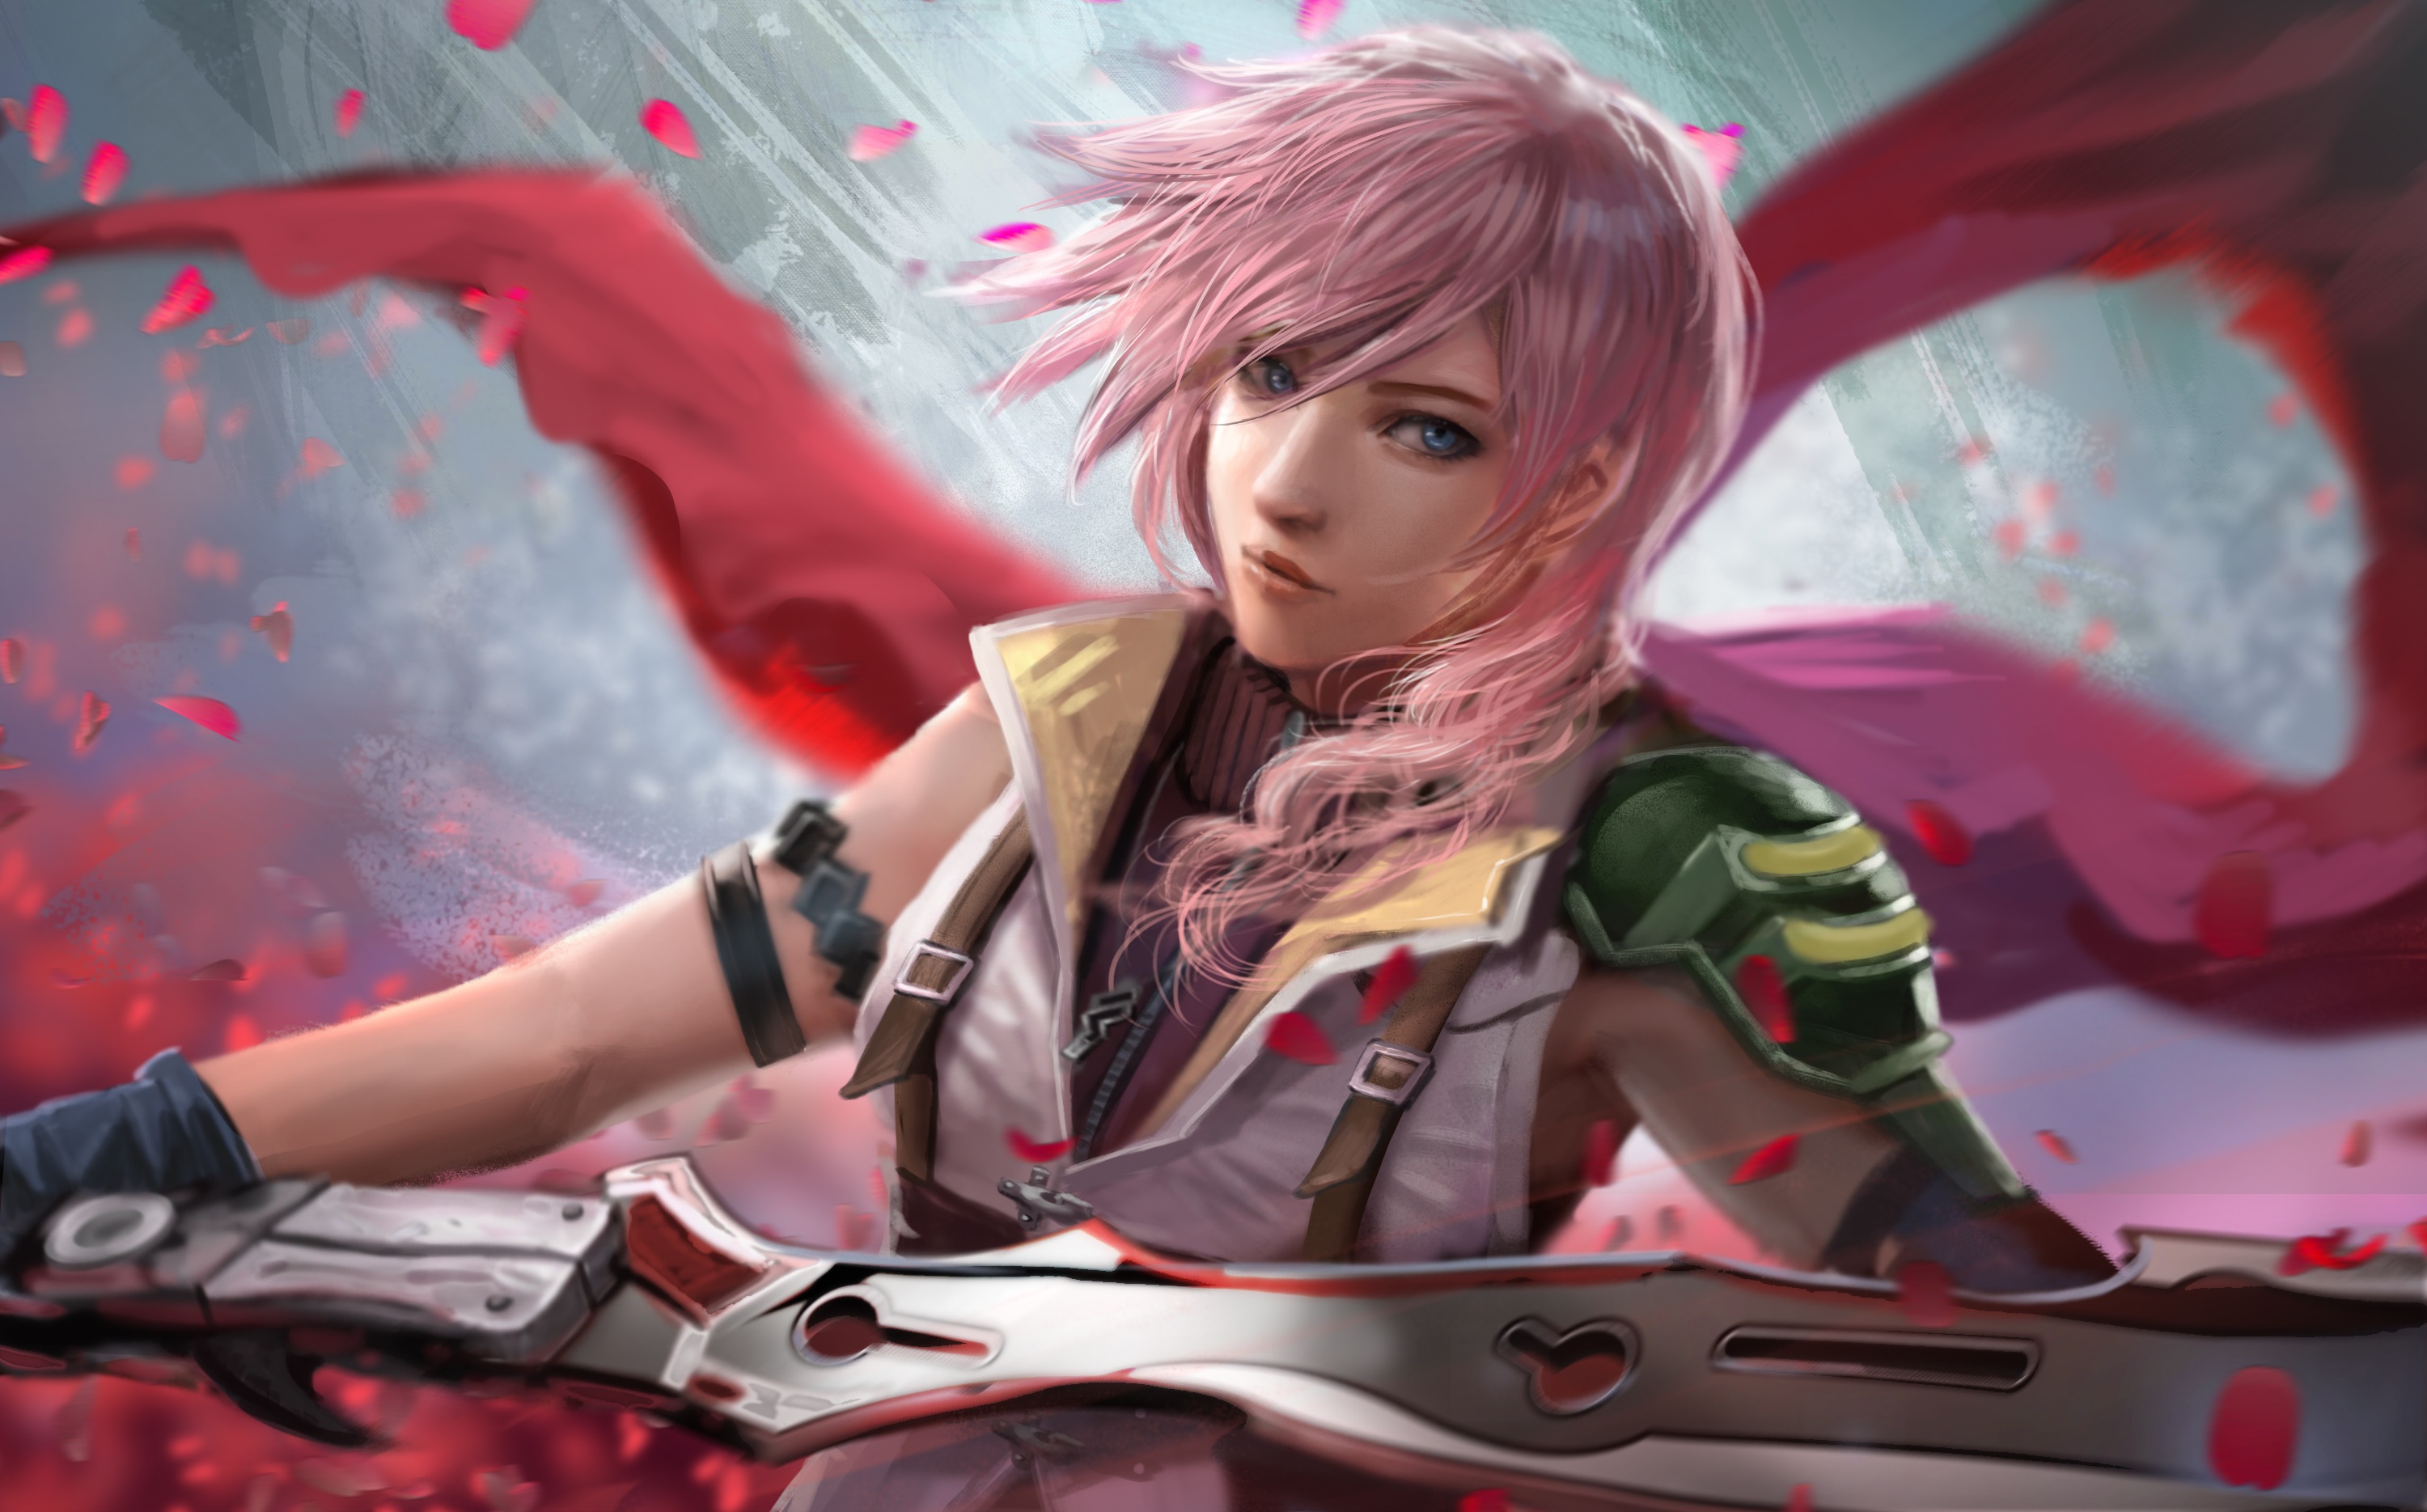 Video Game Final Fantasy XIII HD Wallpaper Background Image. 